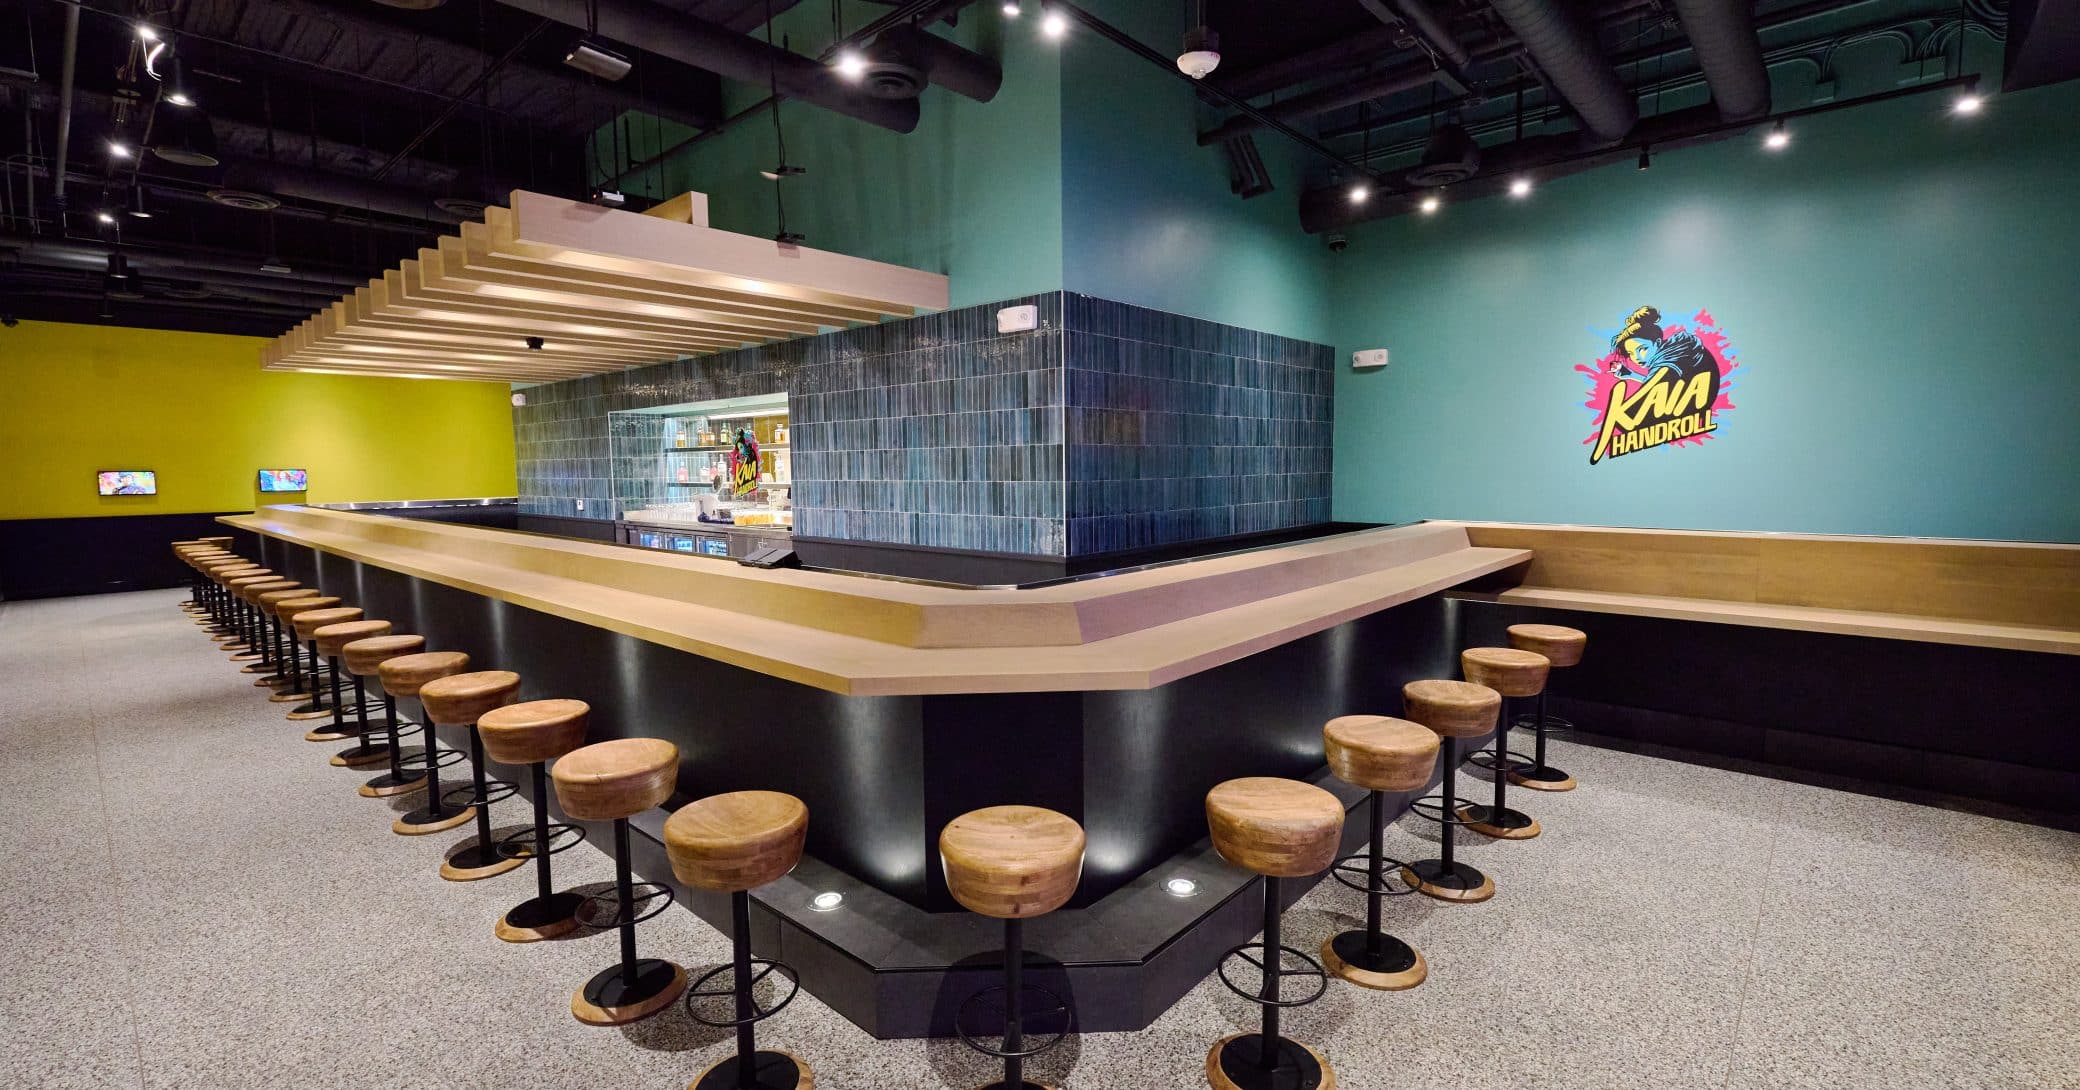 Kalb Industries completed a restaurant tenant improvement for Kaia Handroll Sushi Restaurant.